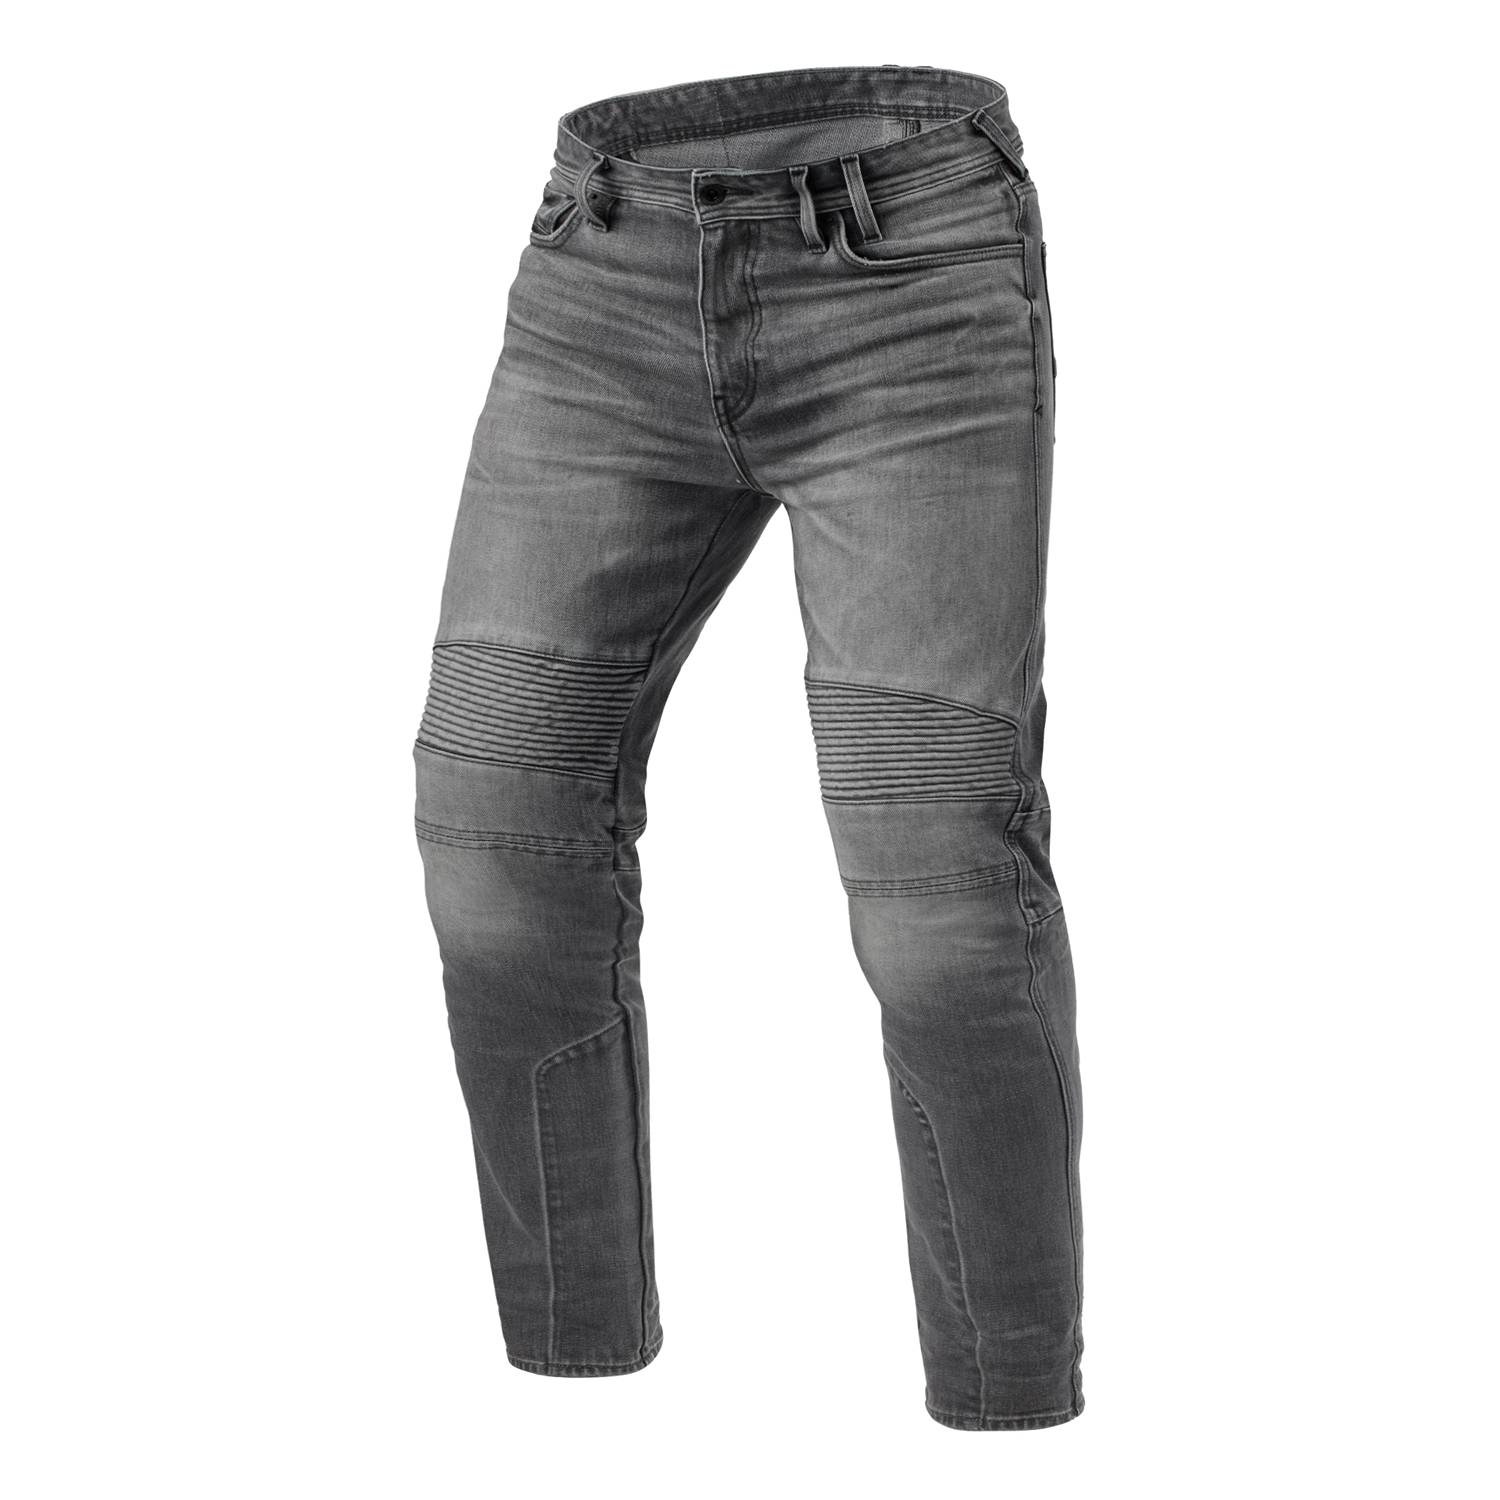 Image of REV'IT! Jeans Moto 2 TF Medium Grey Used L36 Motorcycle Jeans Taille L36/W33